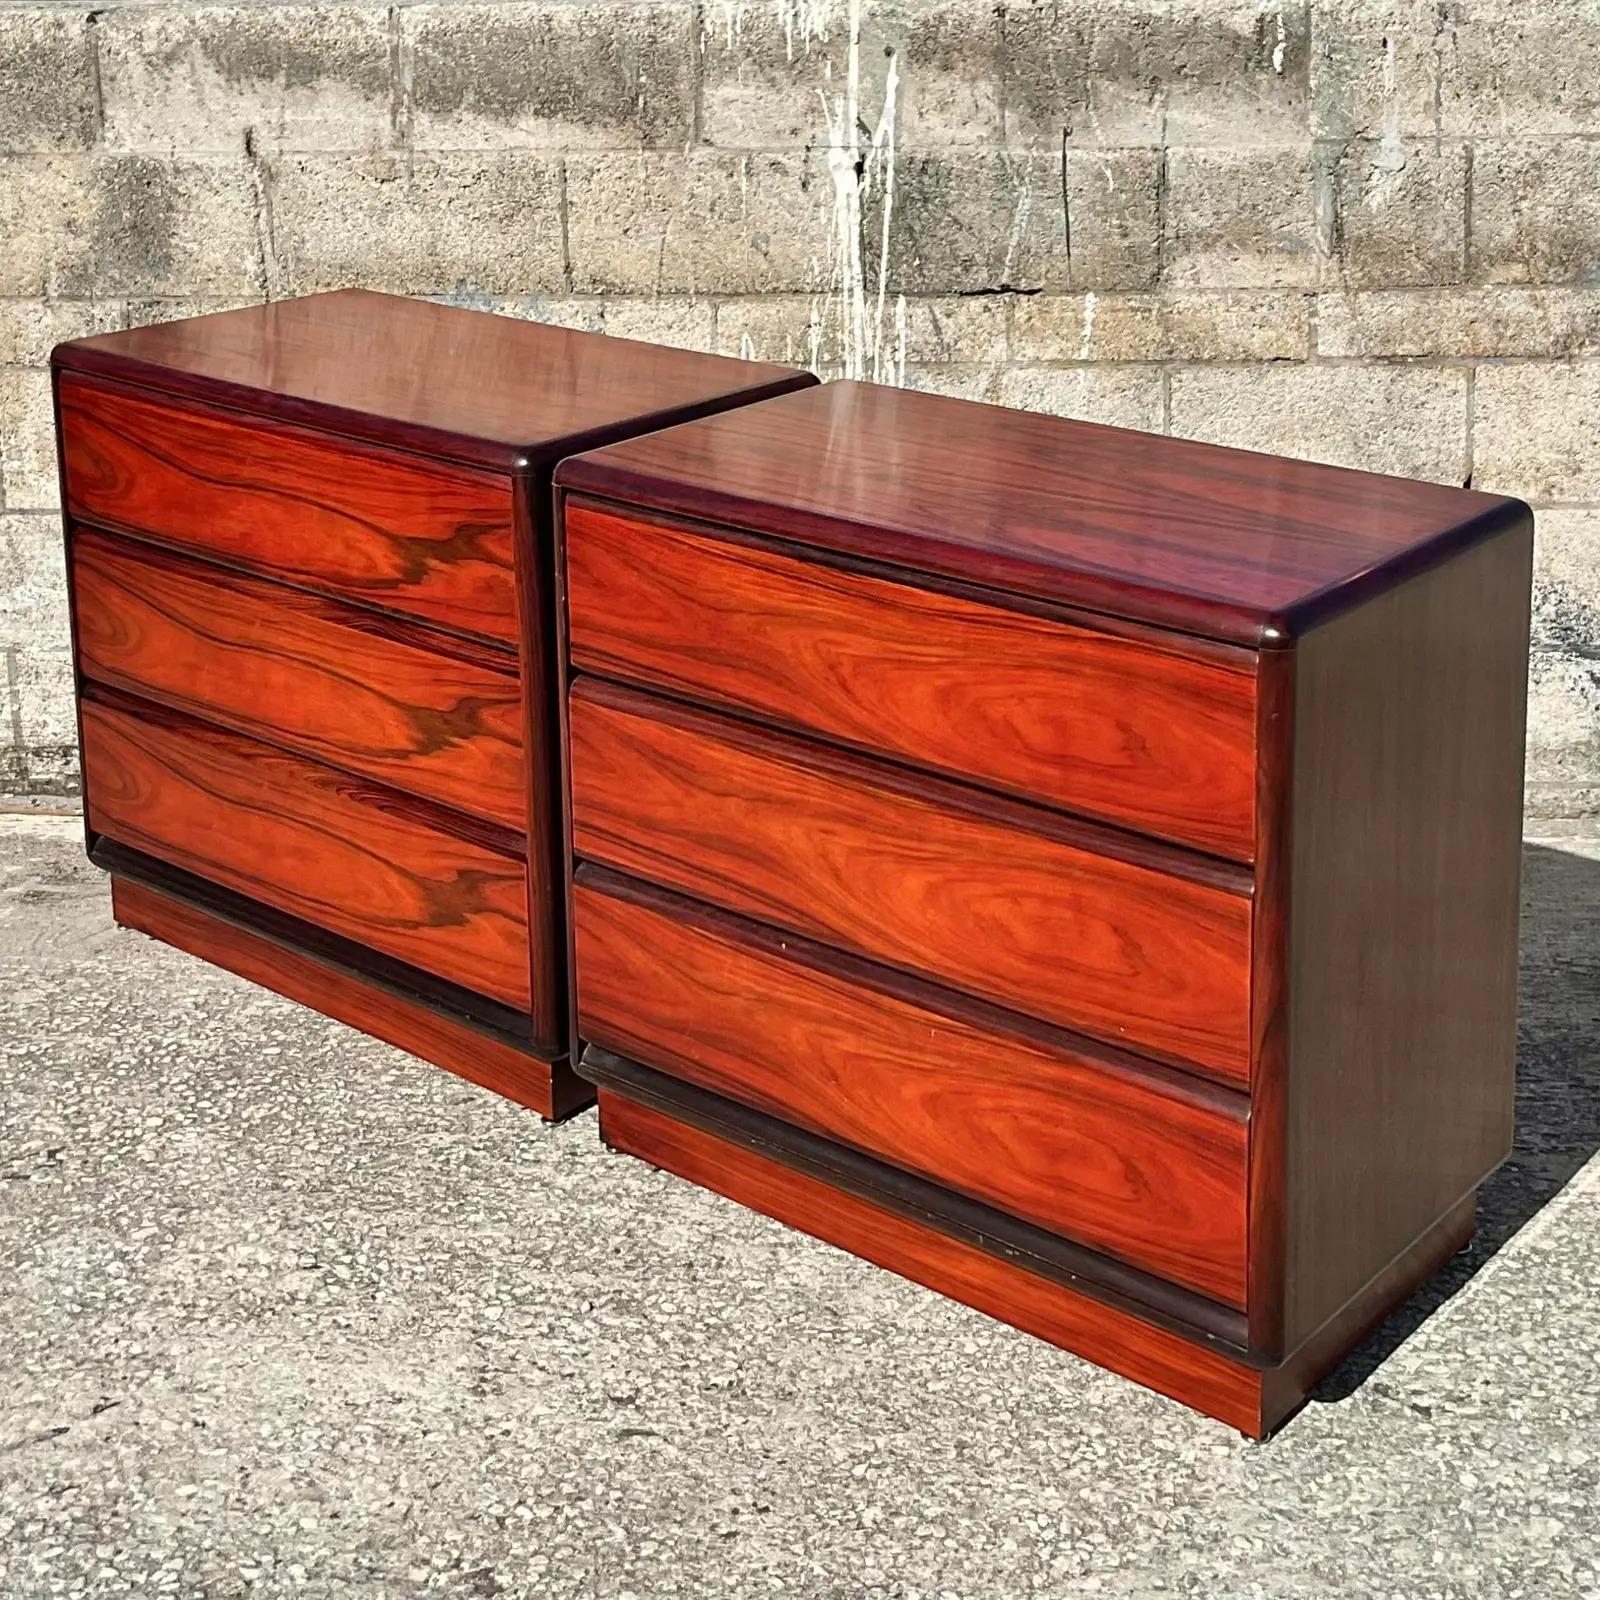 Incredible pair of vintage Rosewood chests of drawers. Made by the MCM iconic Brouer group. Beautiful wood grain detail. Marked on the back. Acquired from a Palm Beach estate.